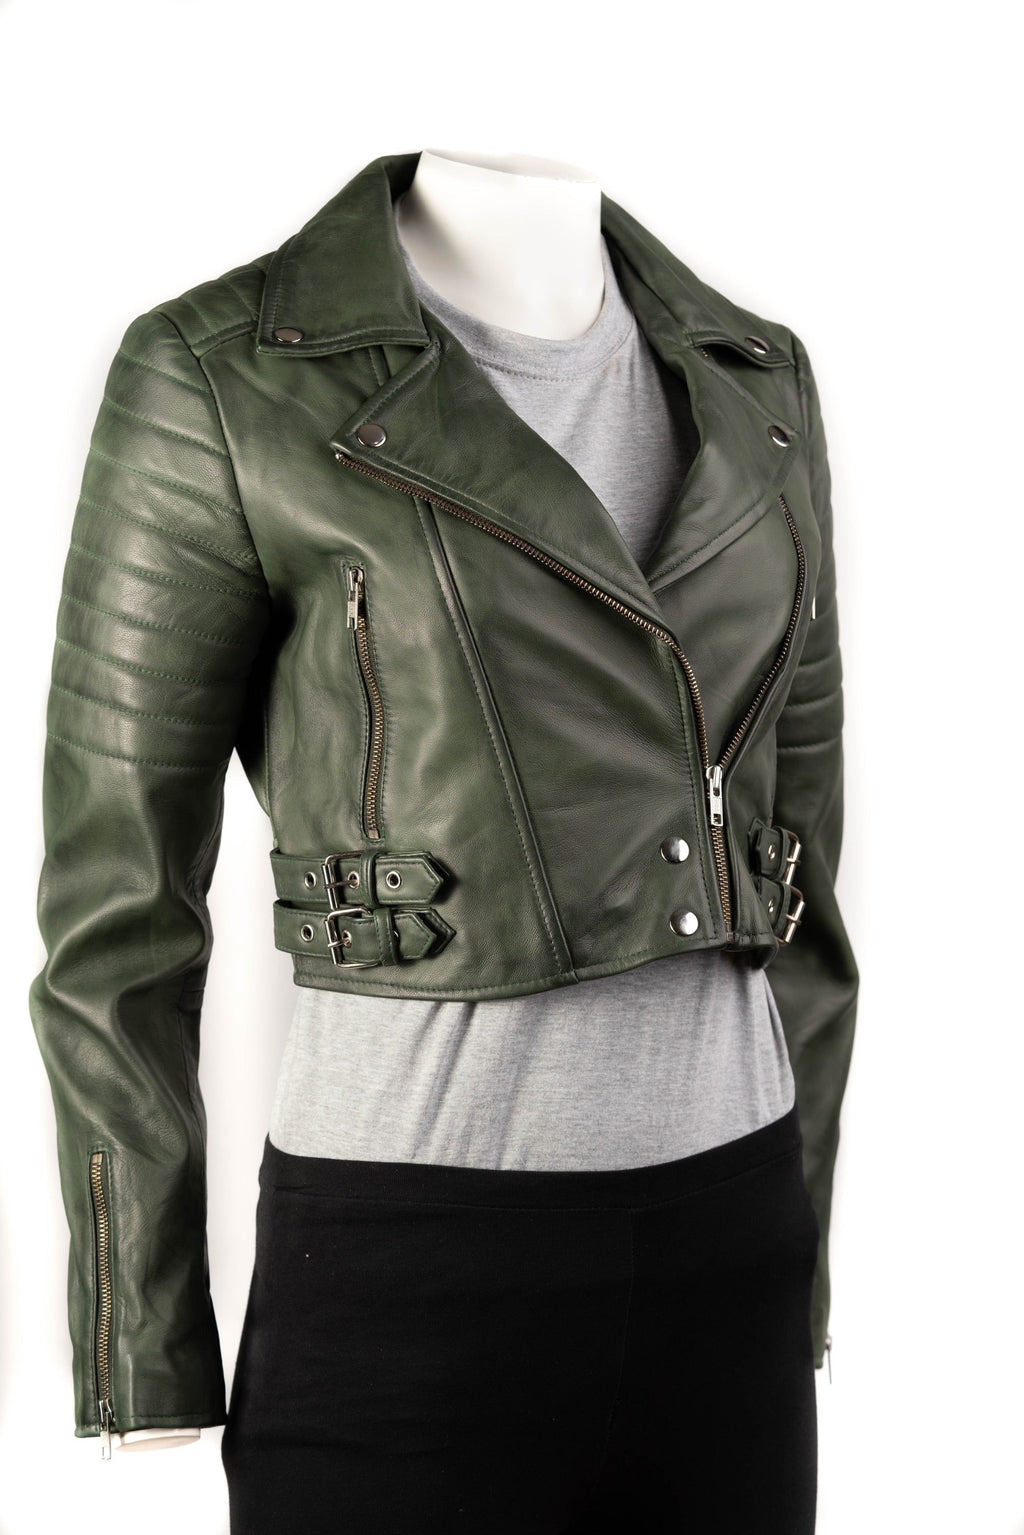 Ladies Forest Green Cropped Leather Biker Style Jacket: Concetta